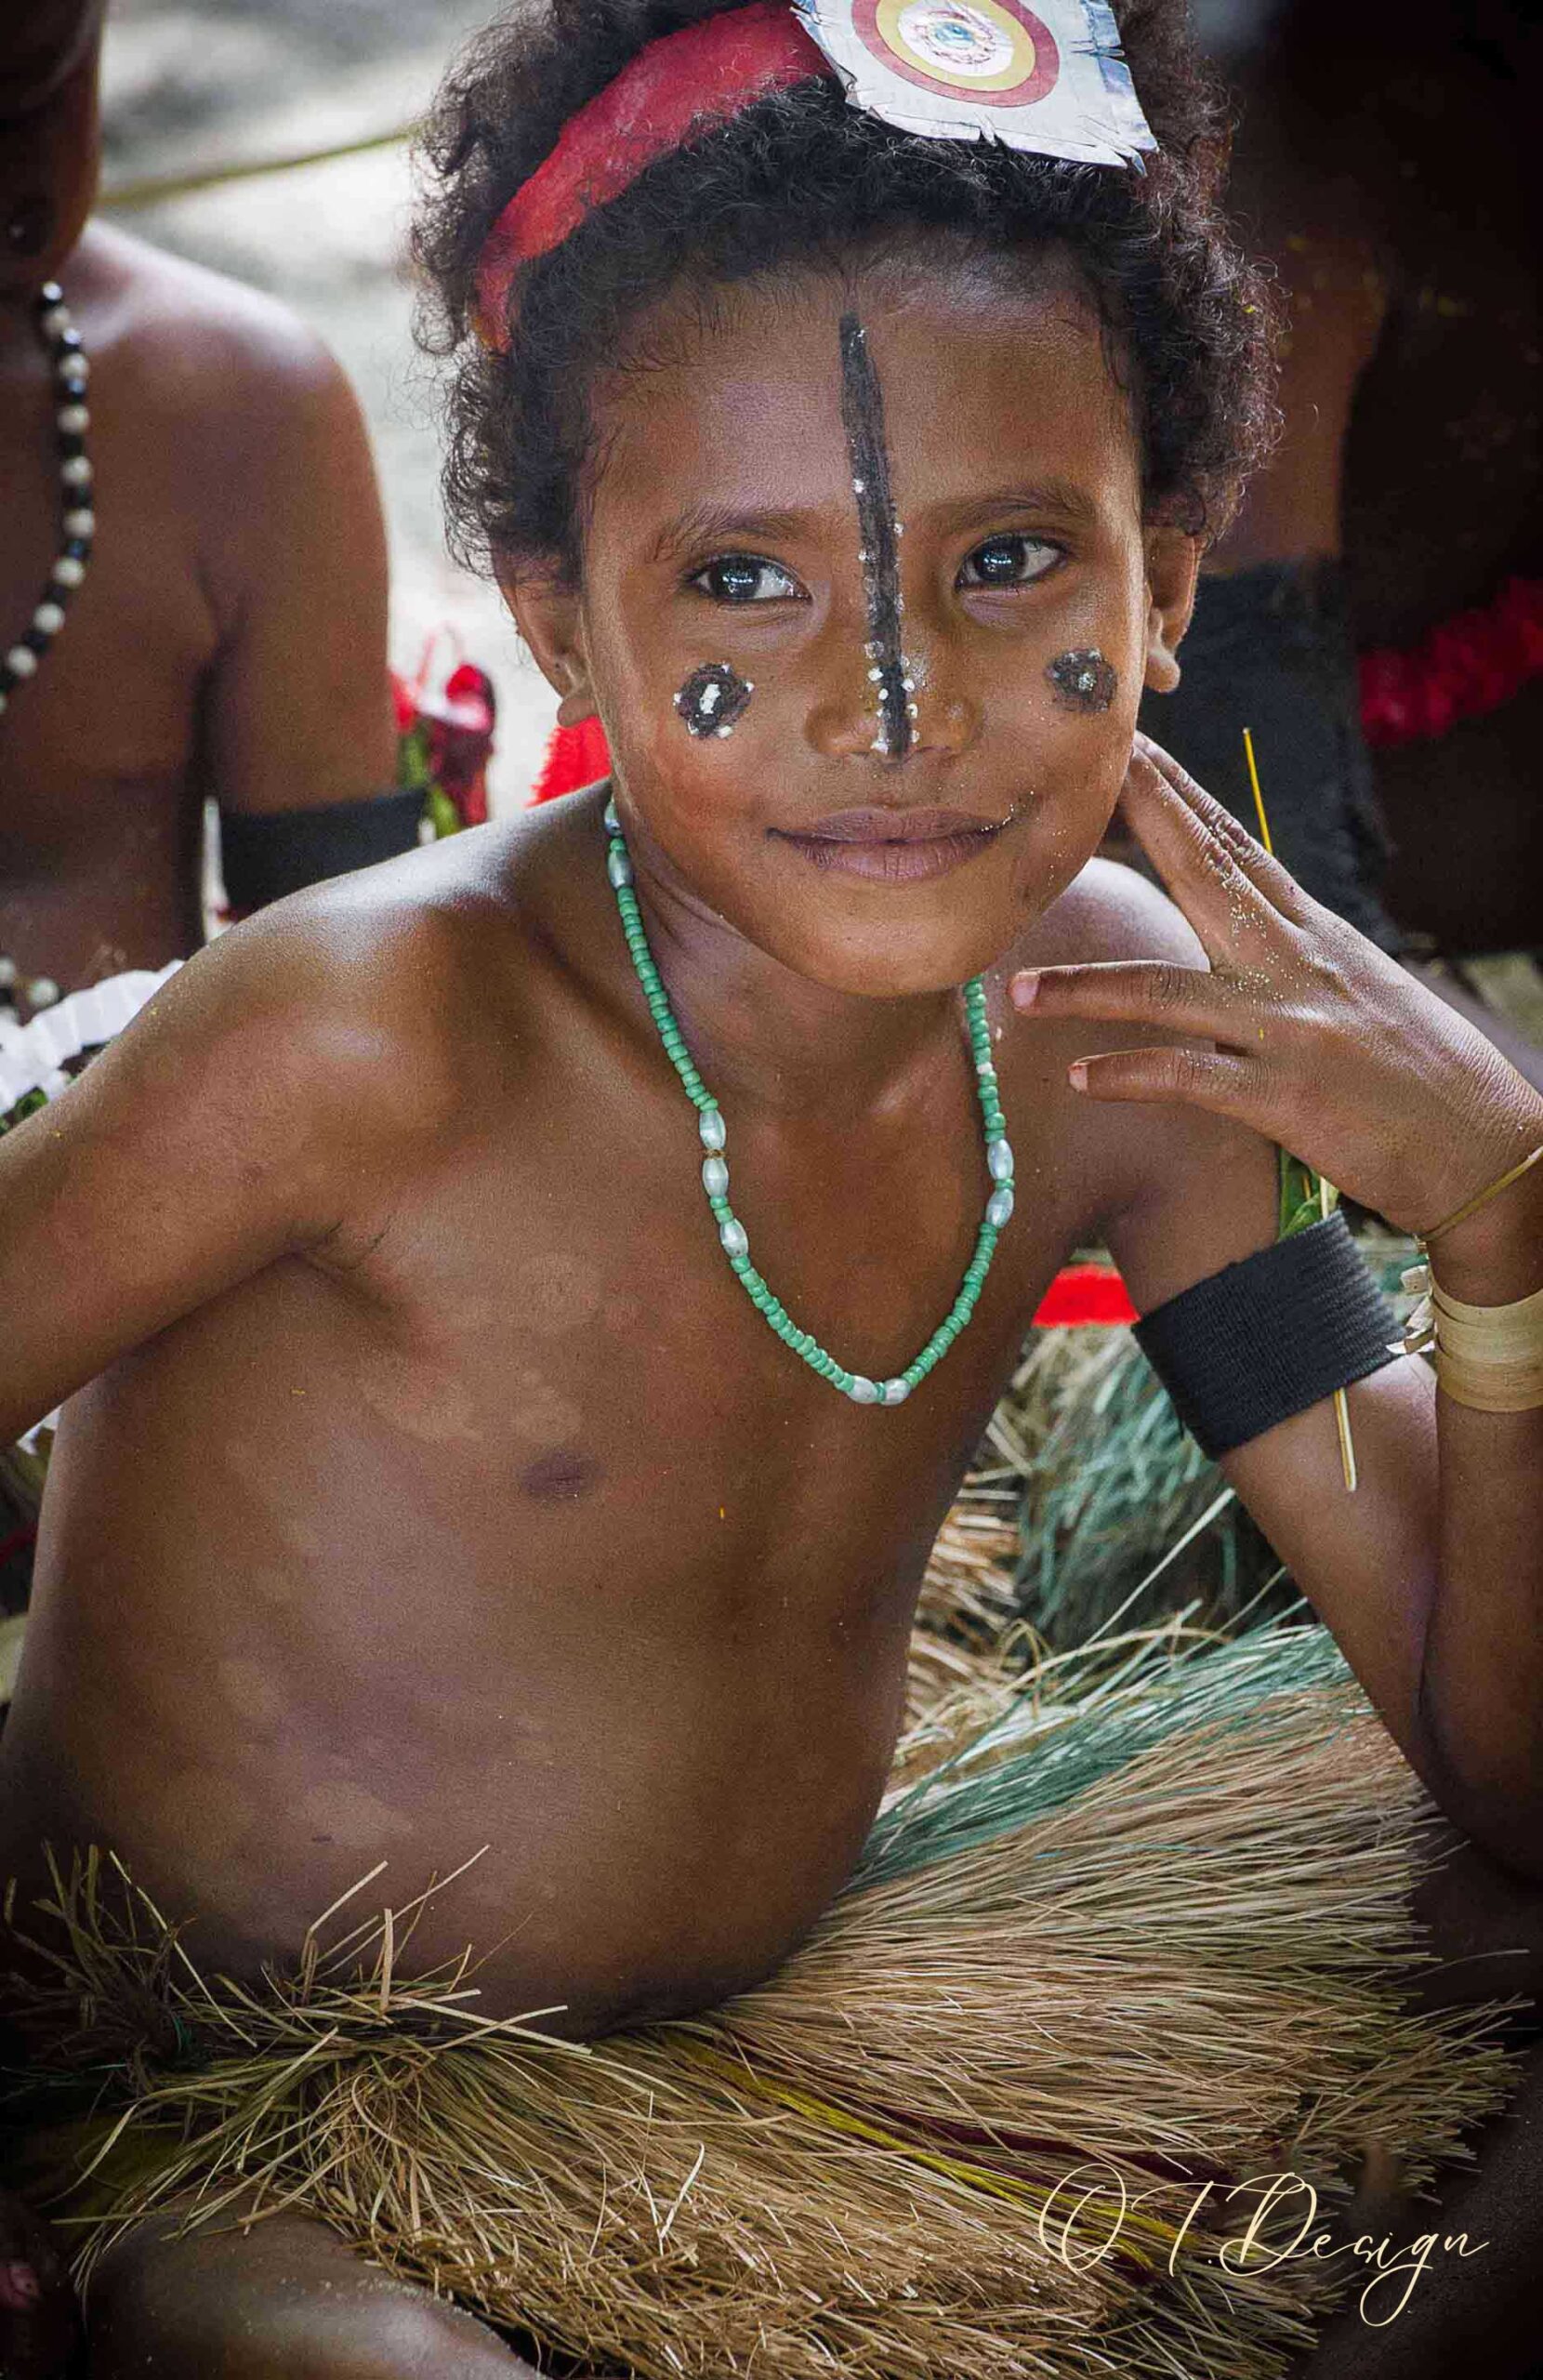 A beautiful expressive young girl painted on her face in Kitava Island, Papua New Guinea